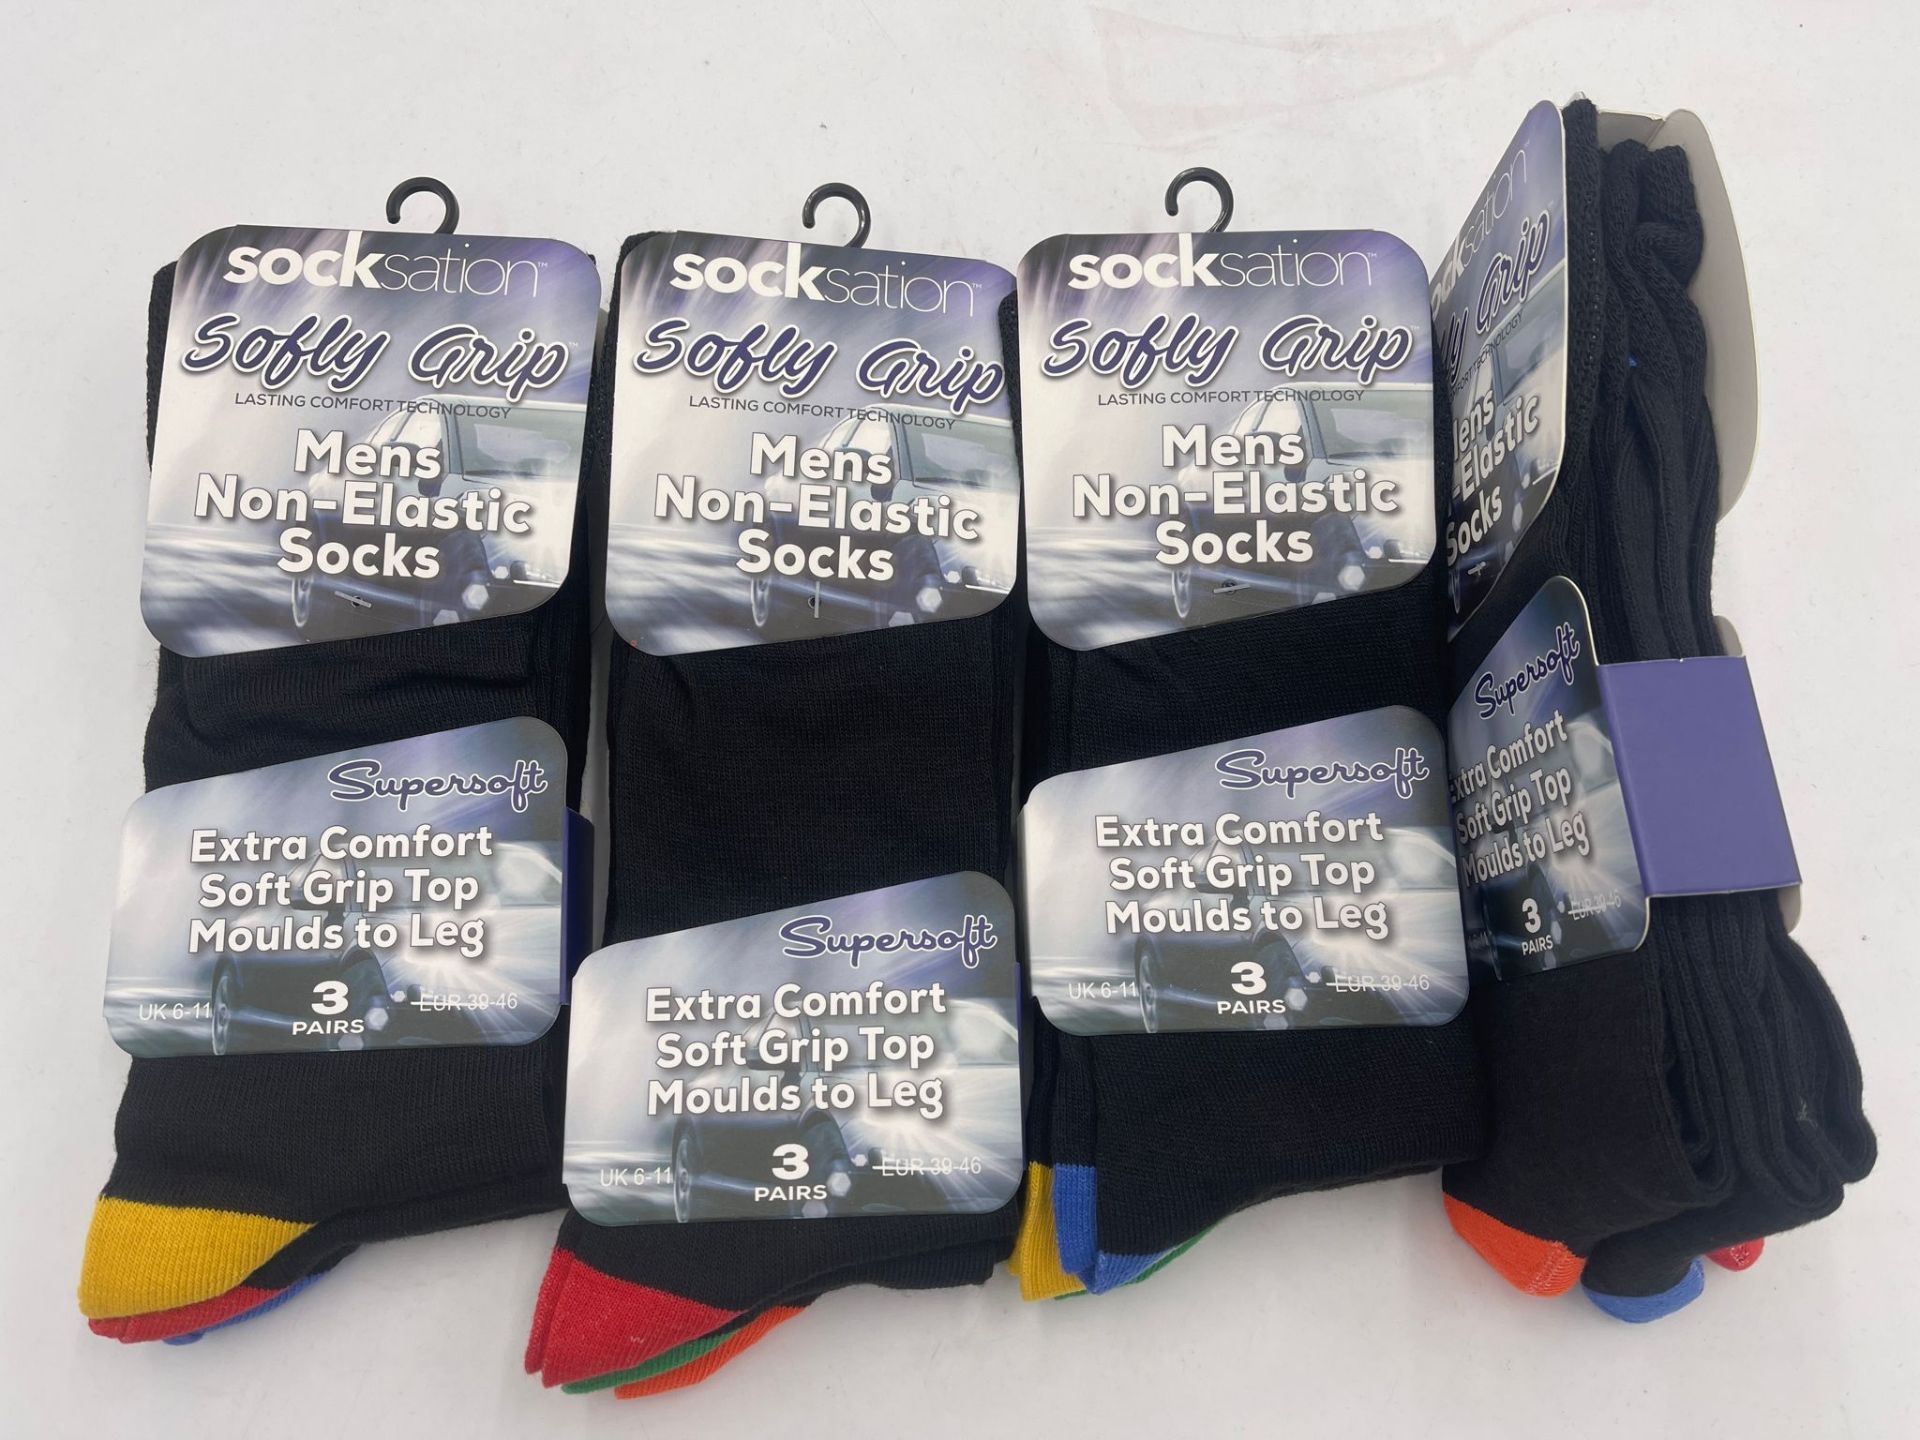 X12 NEW PAIRS OF BLACK EVERYDAY SOCKS - SIZE 6 TO 11.